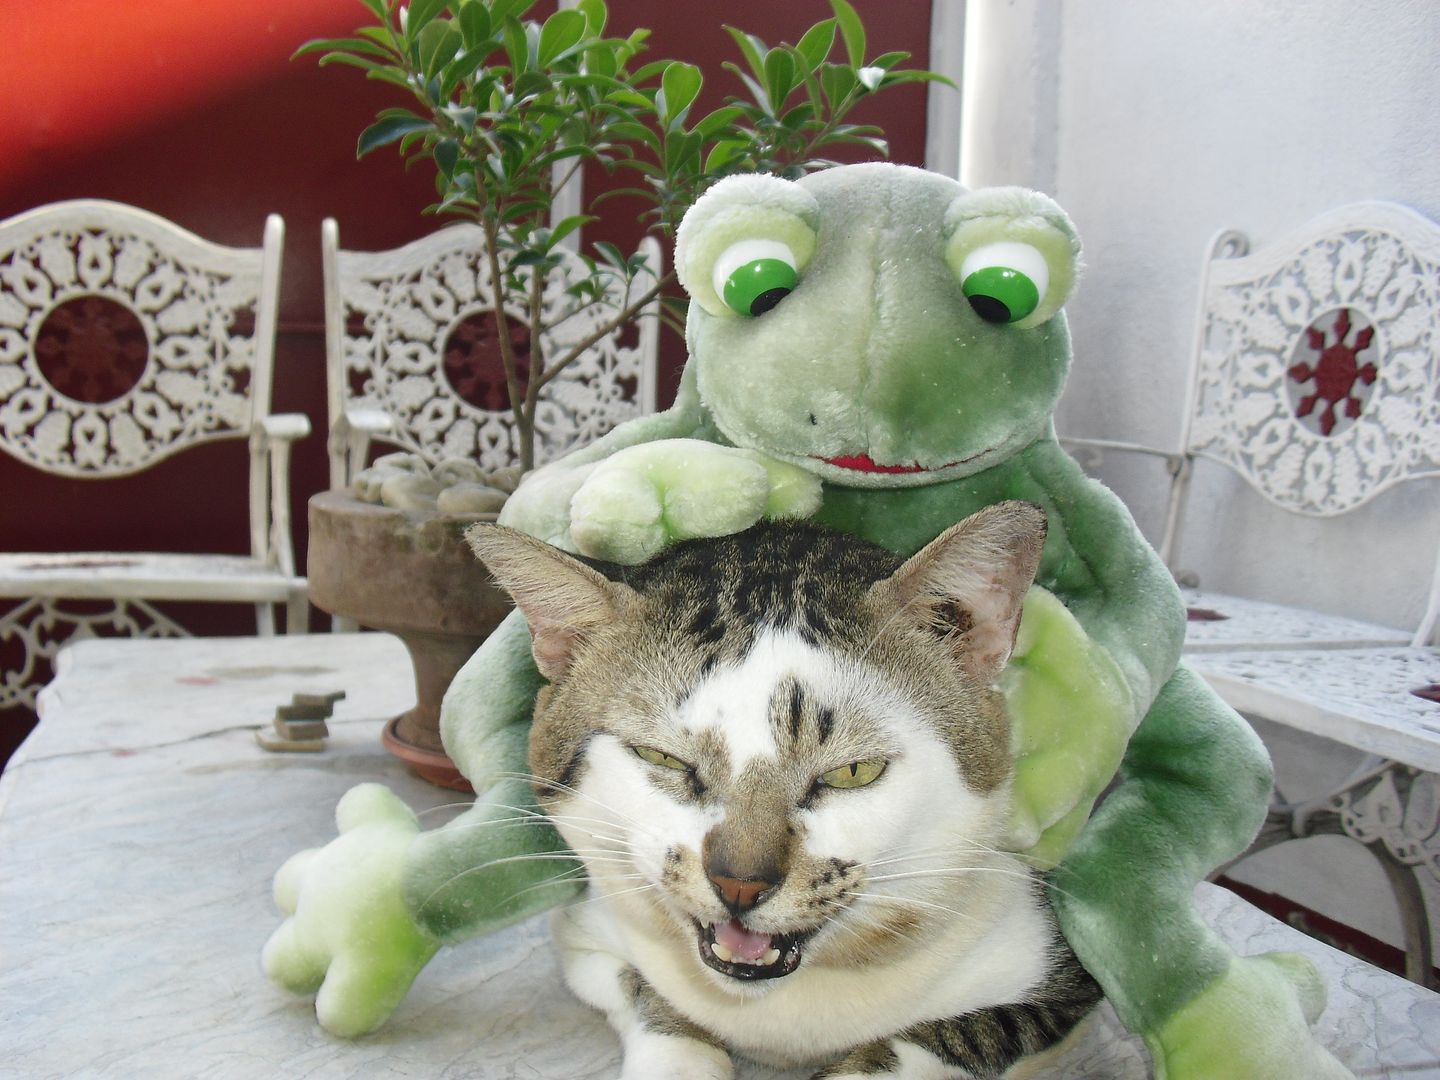 cat_and_frog_by_angel_prophecy-d3j7kgt.jpg